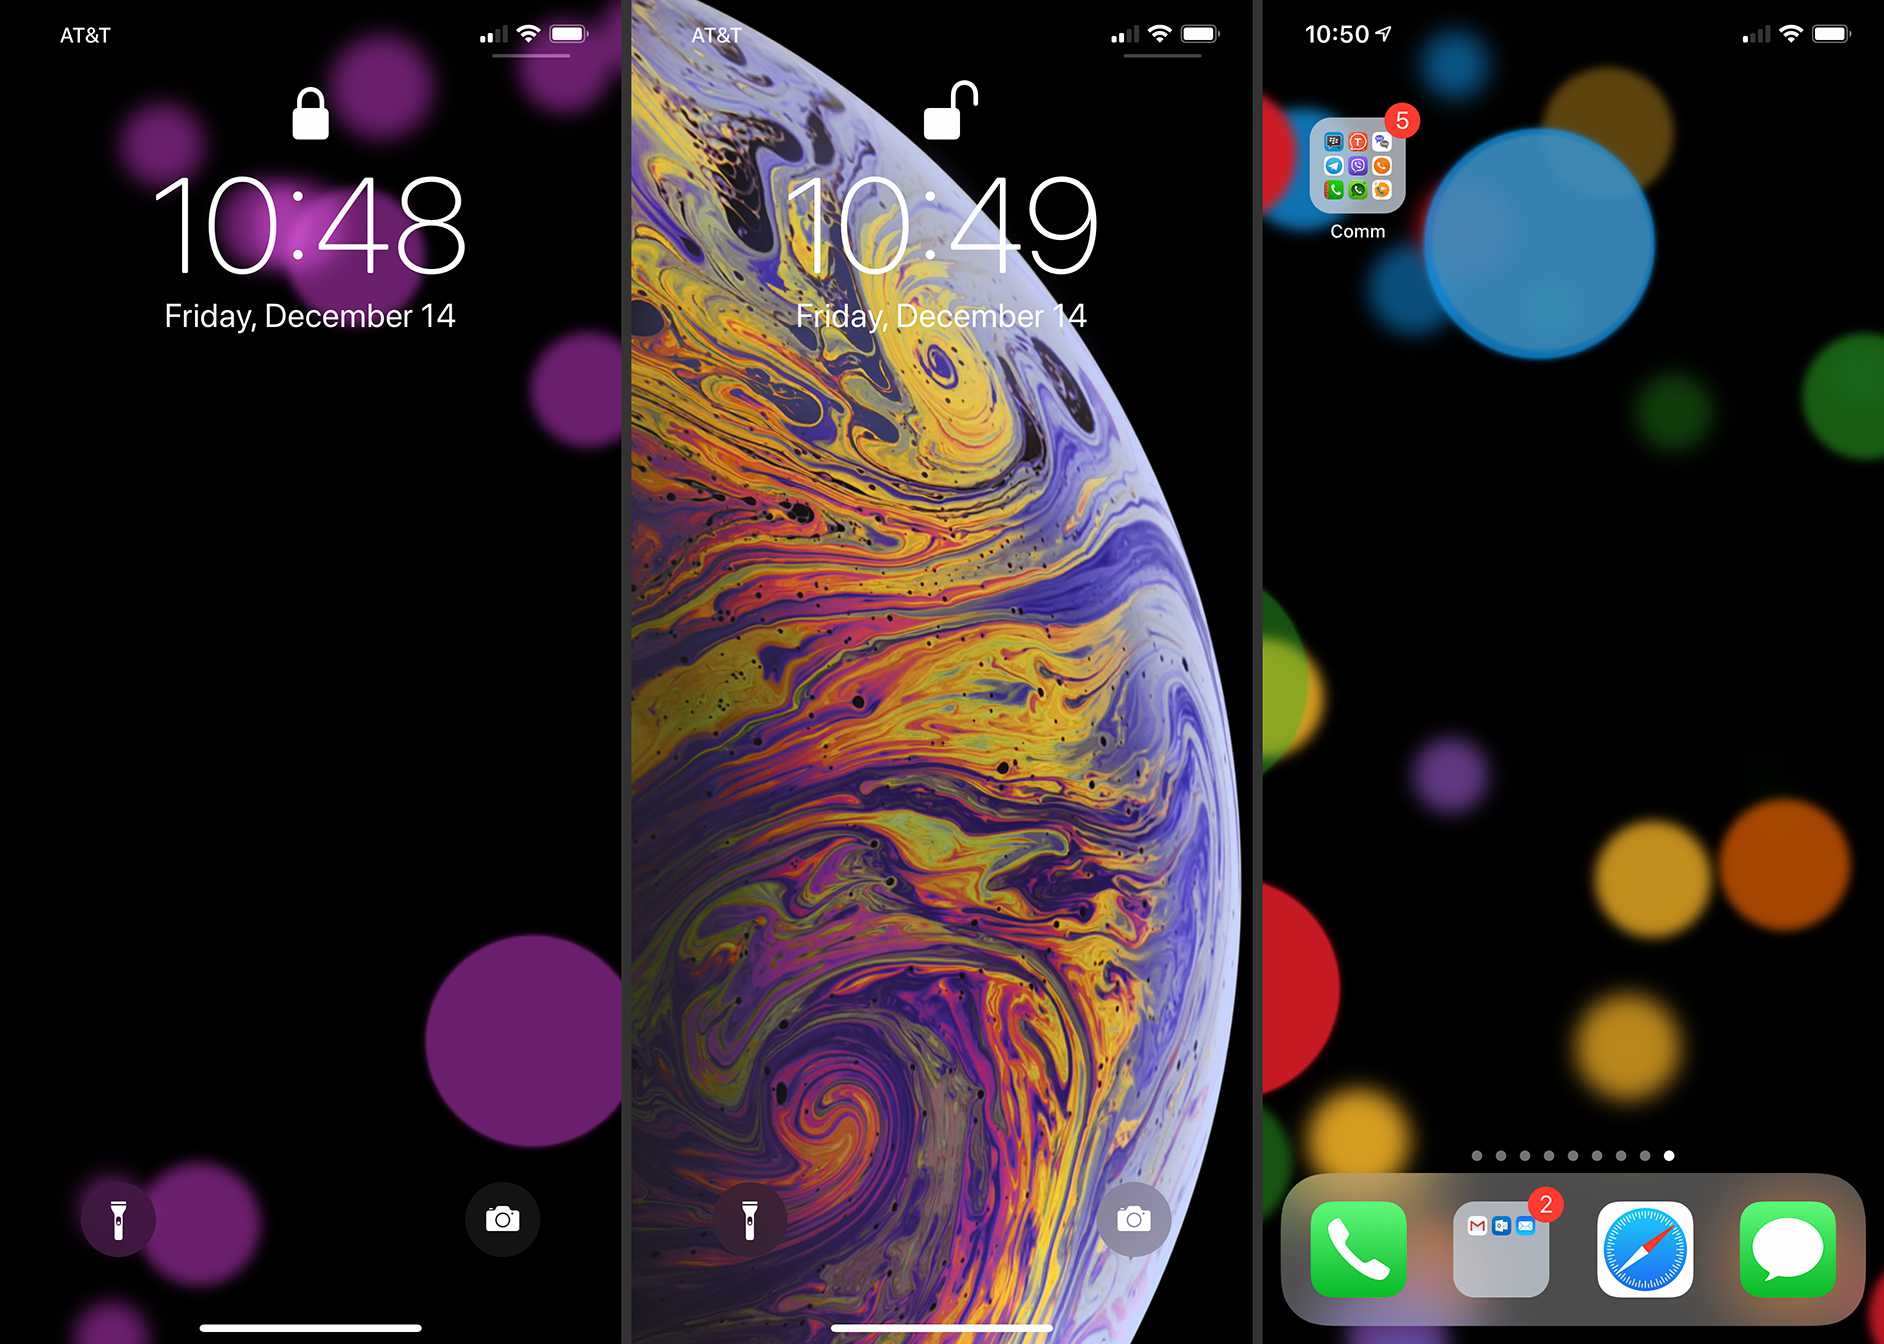 Use Live Wallpapers on Your iPhone